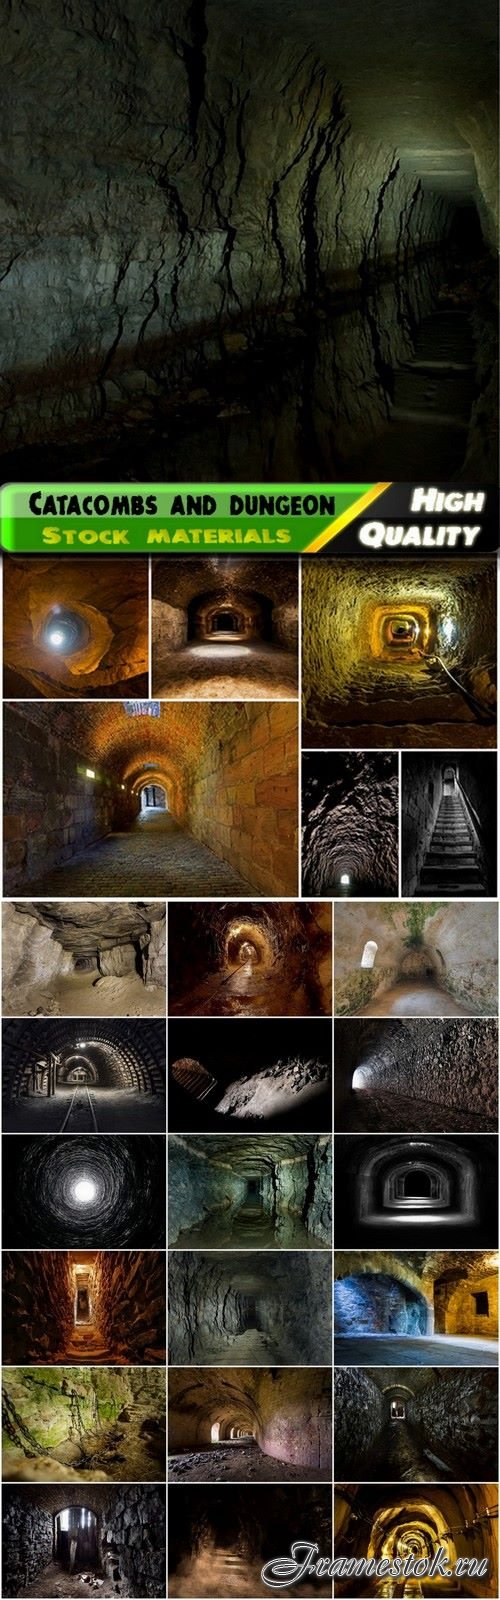 Old cellars and damp catacombs and dungeons - 25 HQ Jpg